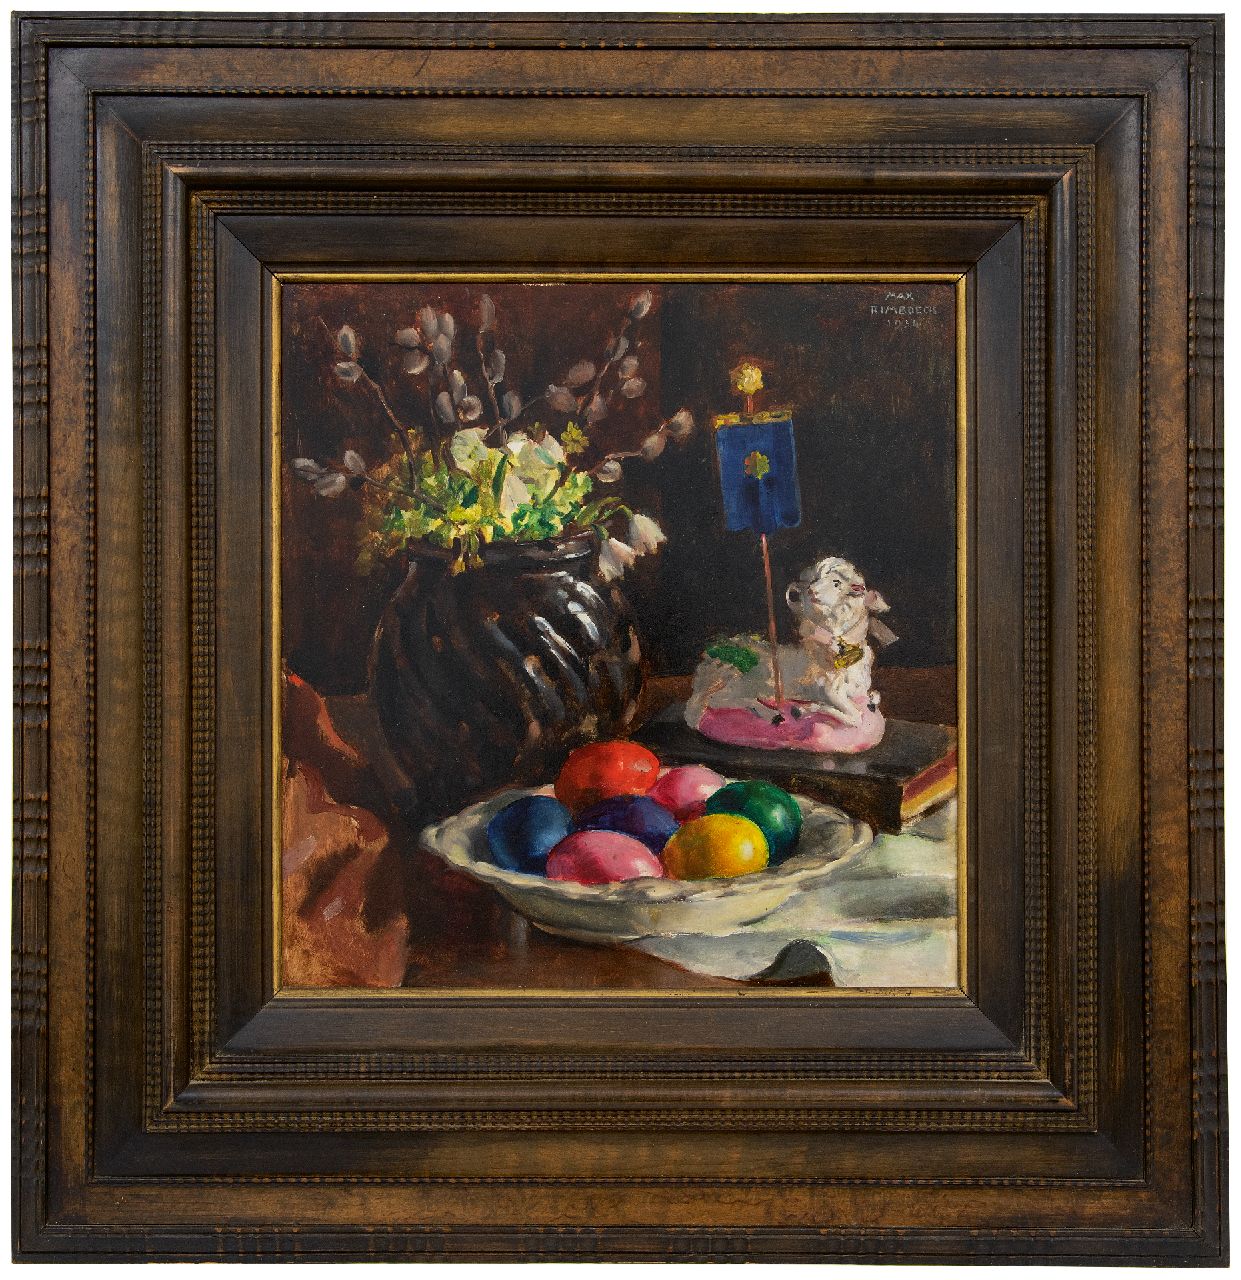 Rimböck M.  | Max Rimböck | Paintings offered for sale | Easter still life, oil on panel 38.3 x 37.0 cm, signed u.r. and dated 1934